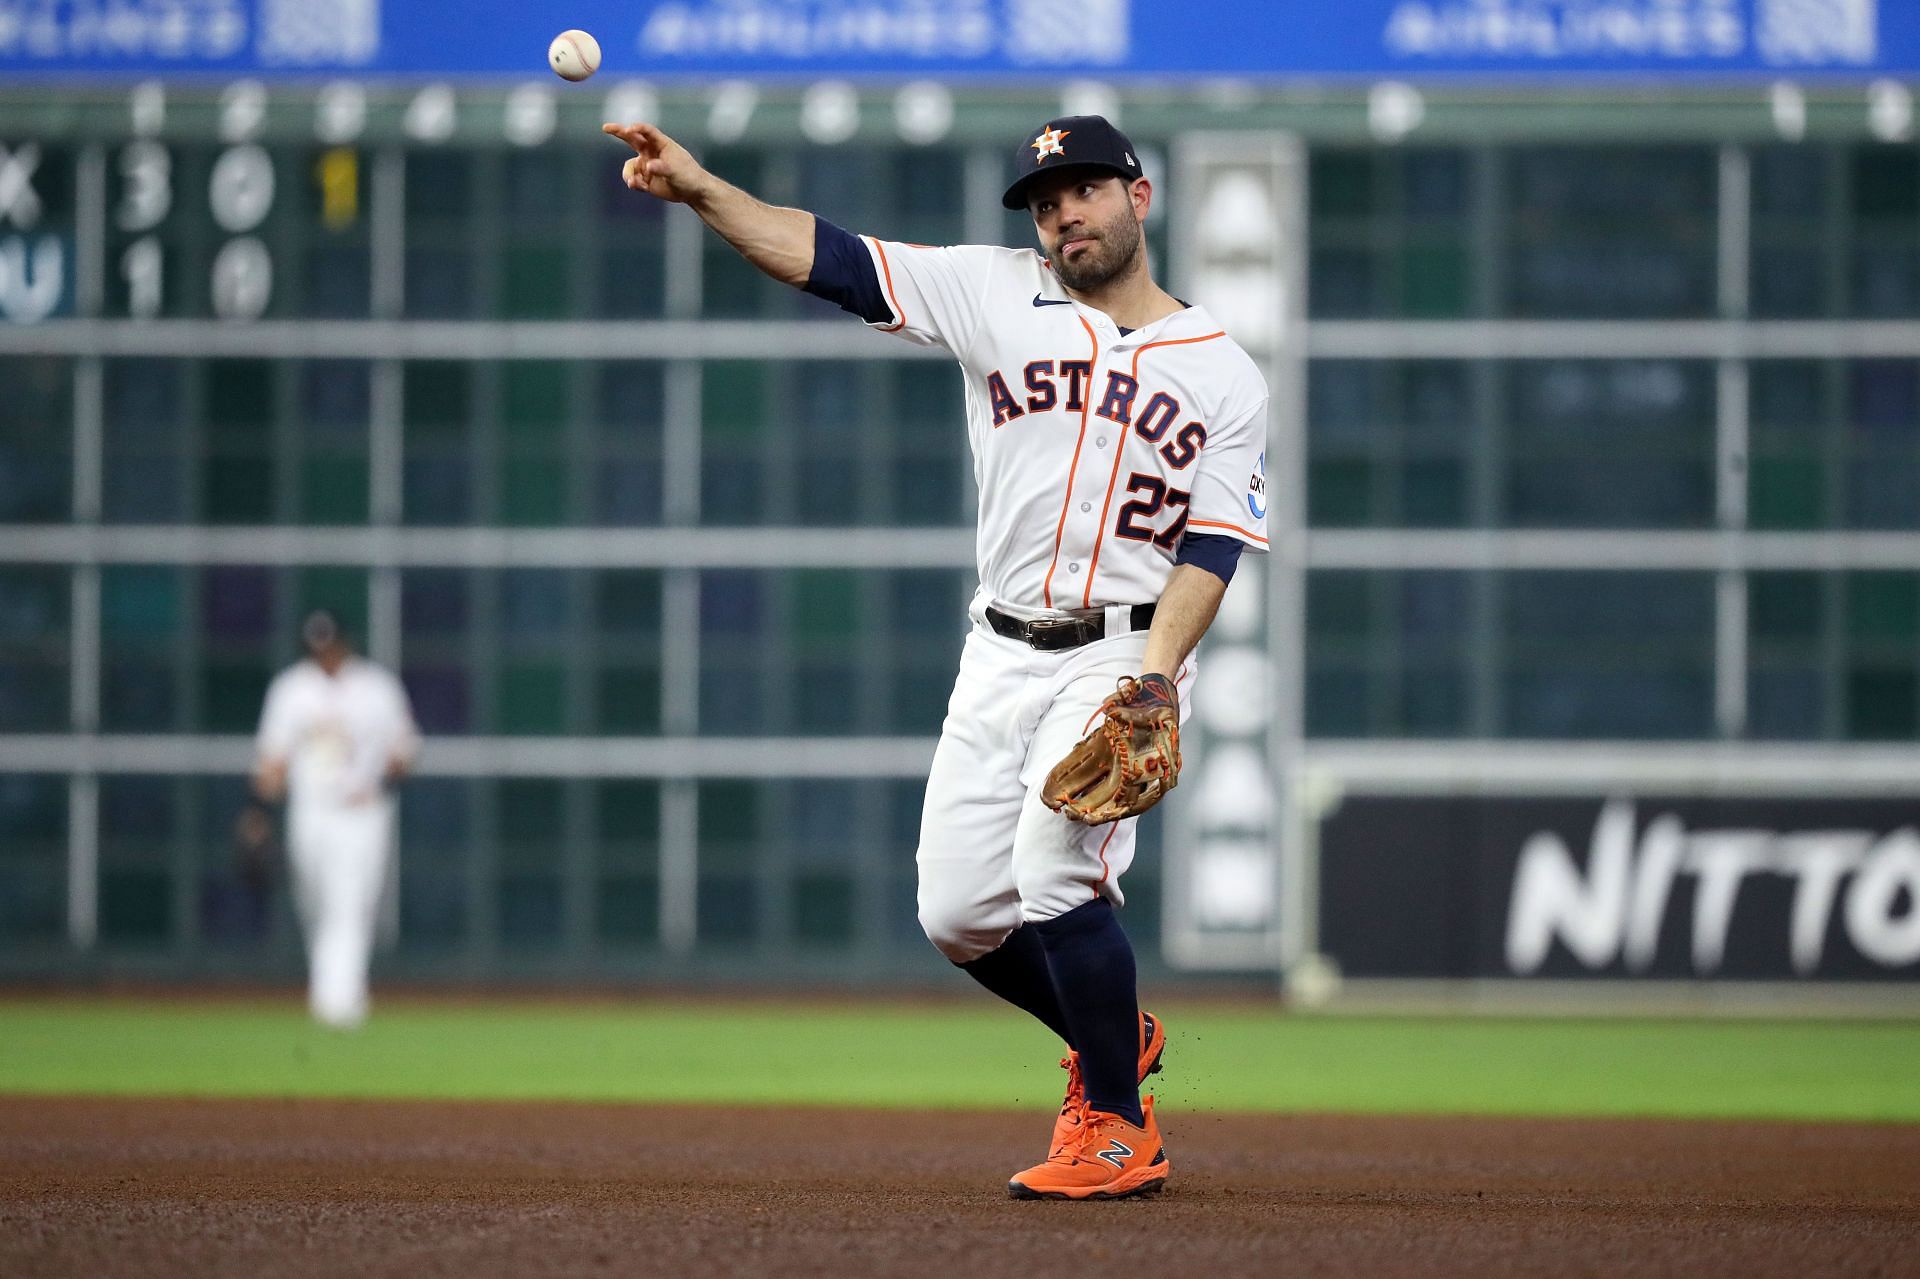 Jose Altuve is leading the Astros into the future